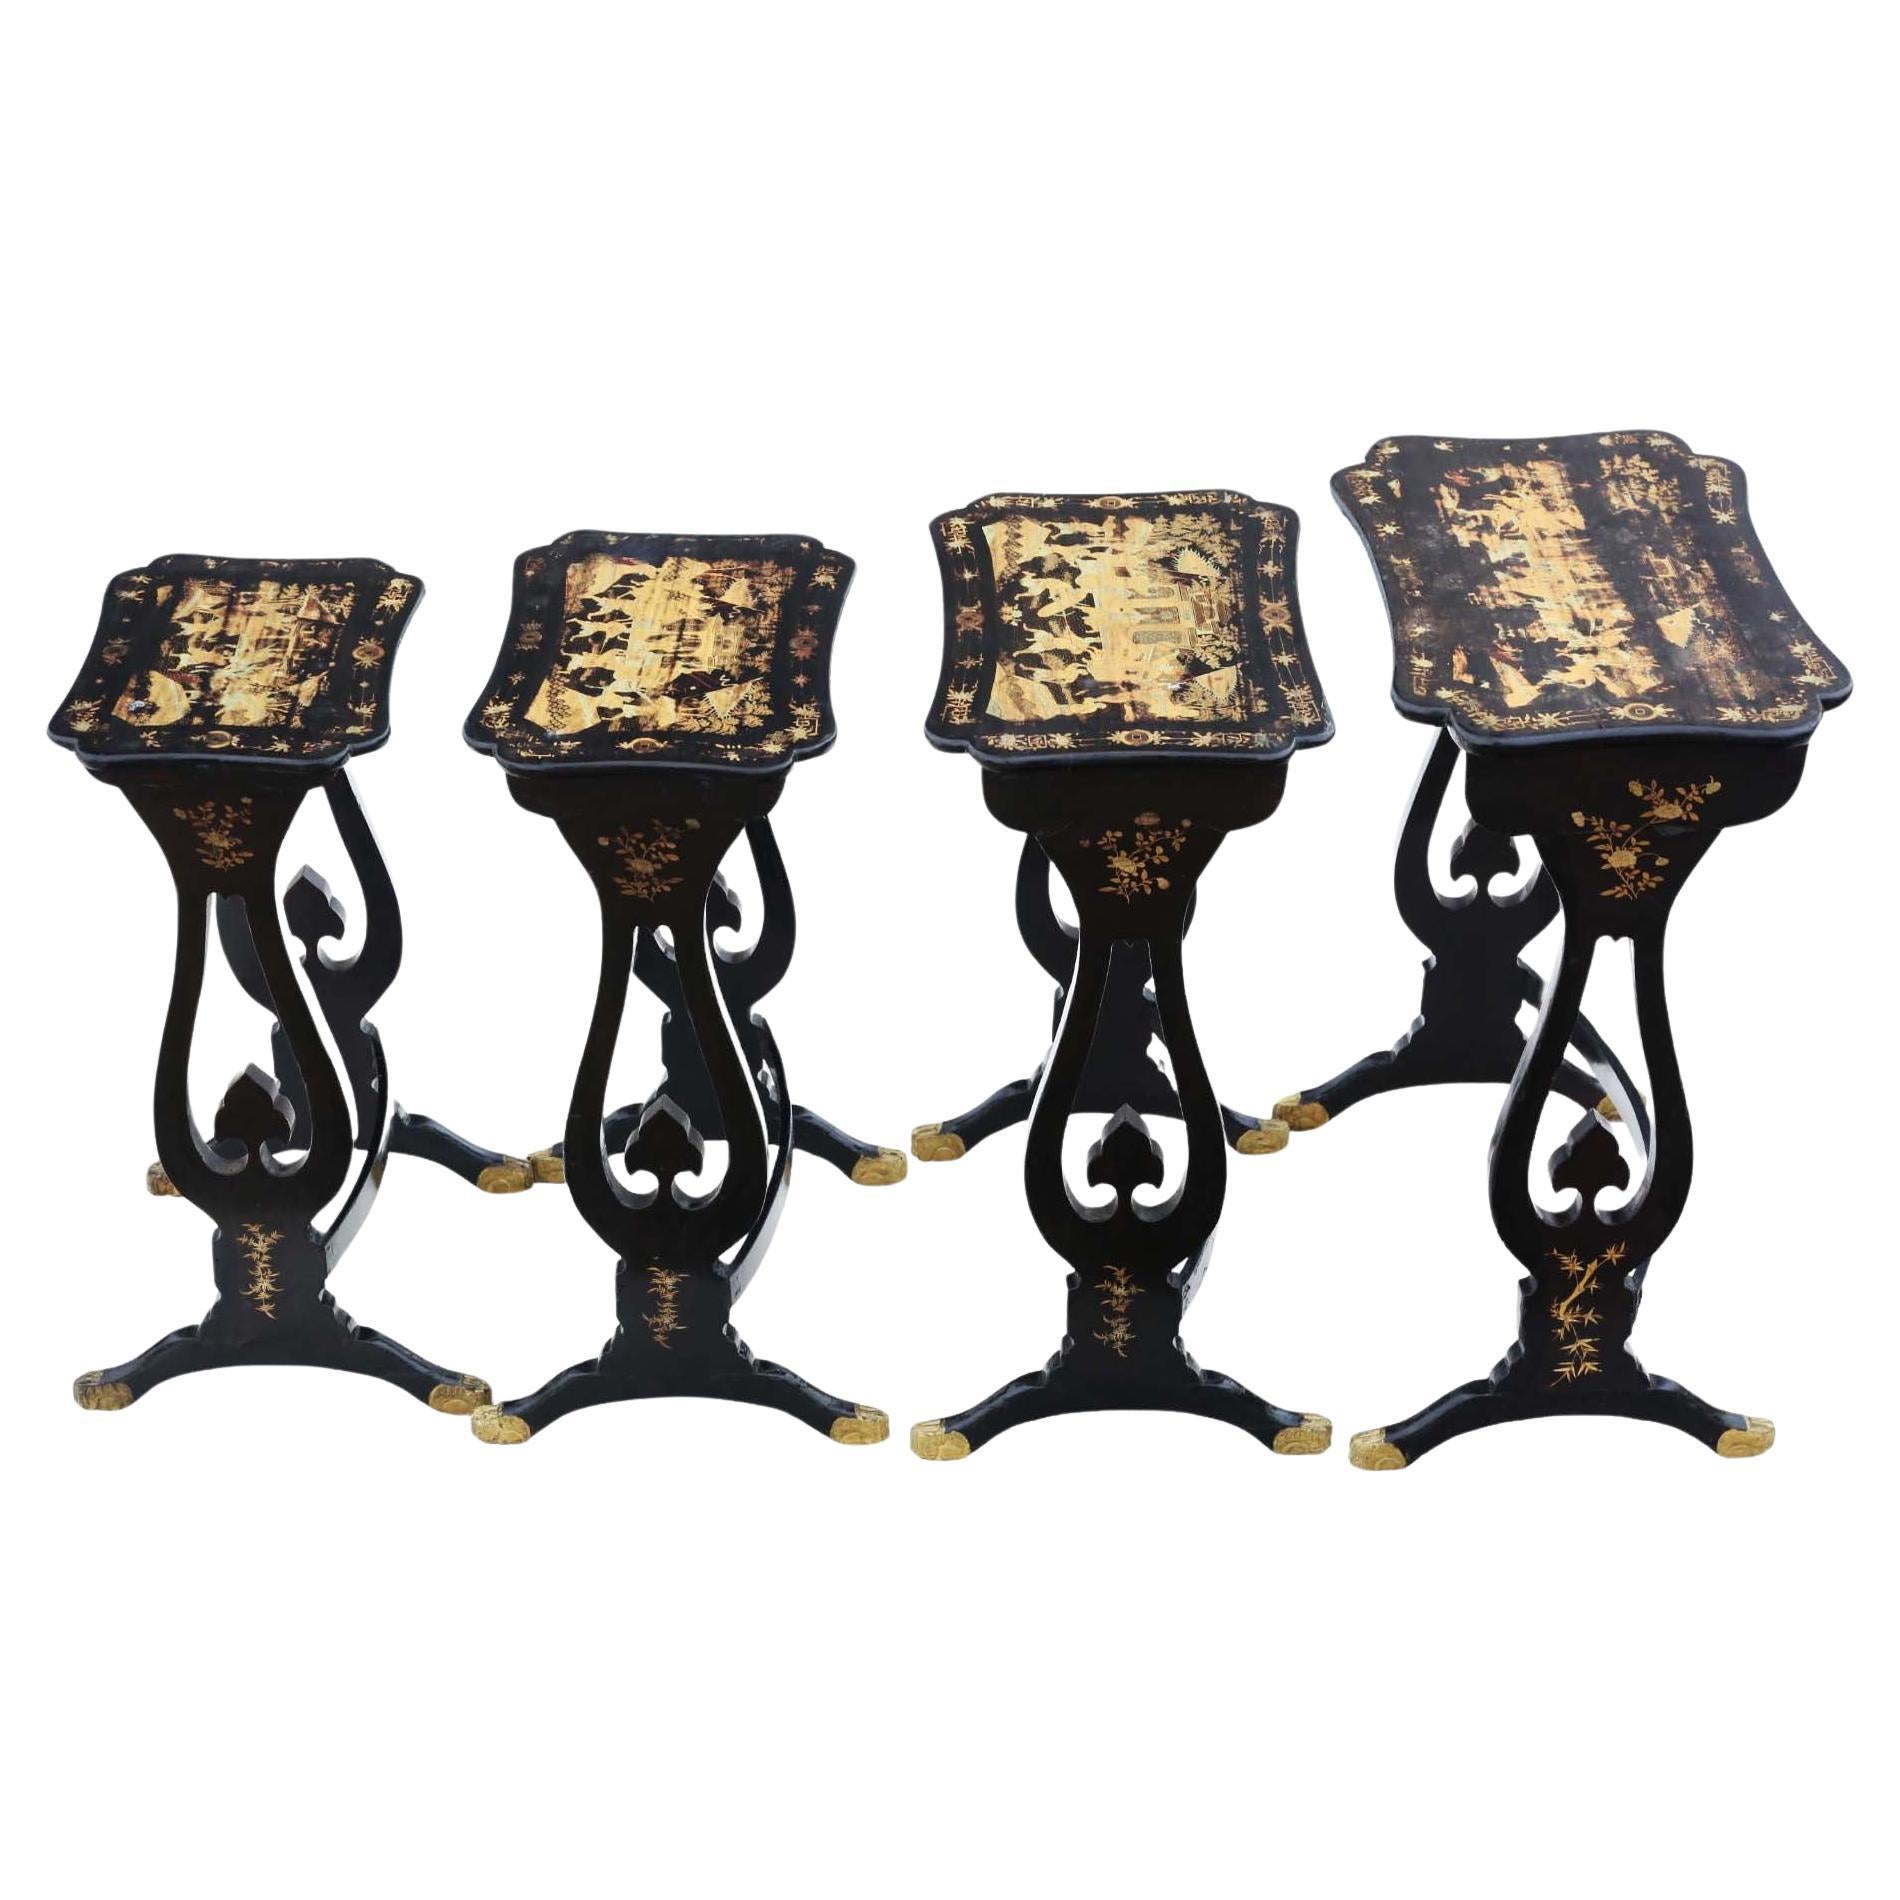 Antique Chinoiserie Boulle-work black lacquer nest of 4 19th Century tables